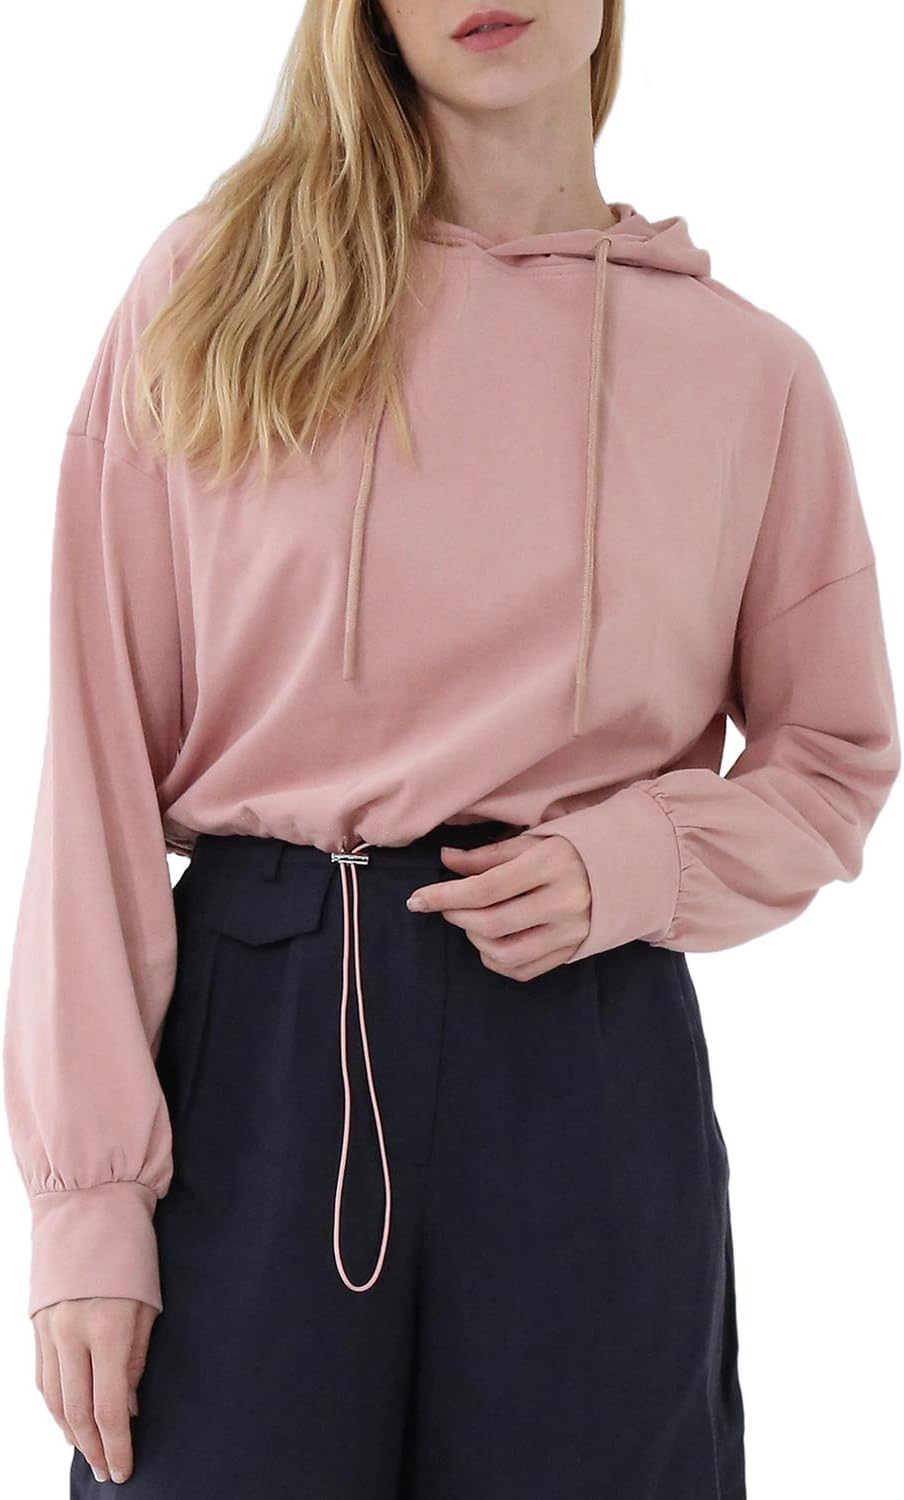 NTG Fad Charm Pink / XX-Large Cropped Hoodies Long Sleeve Drawstring Casual Crop Top